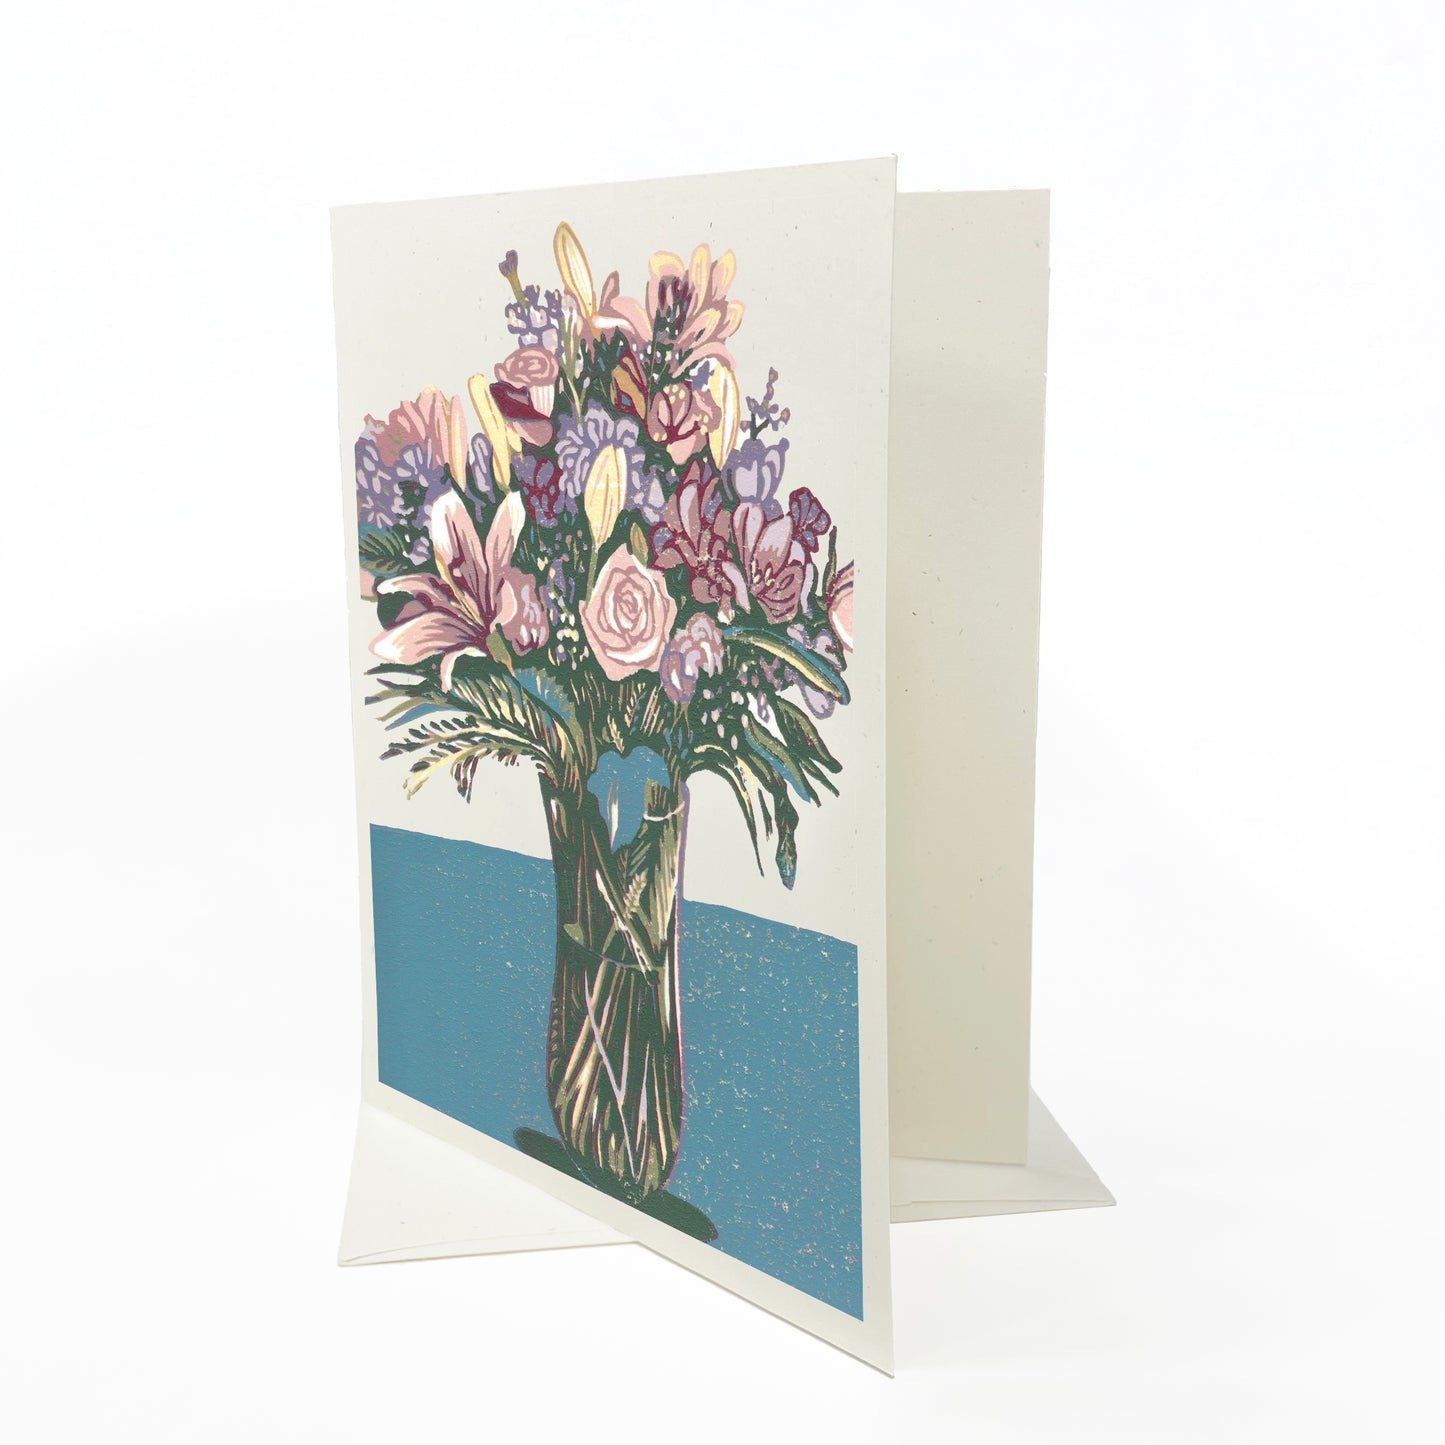 A casually elegant card featuring floral art by Natalia Wohletz of Peninsula Prints titled Bouquet.